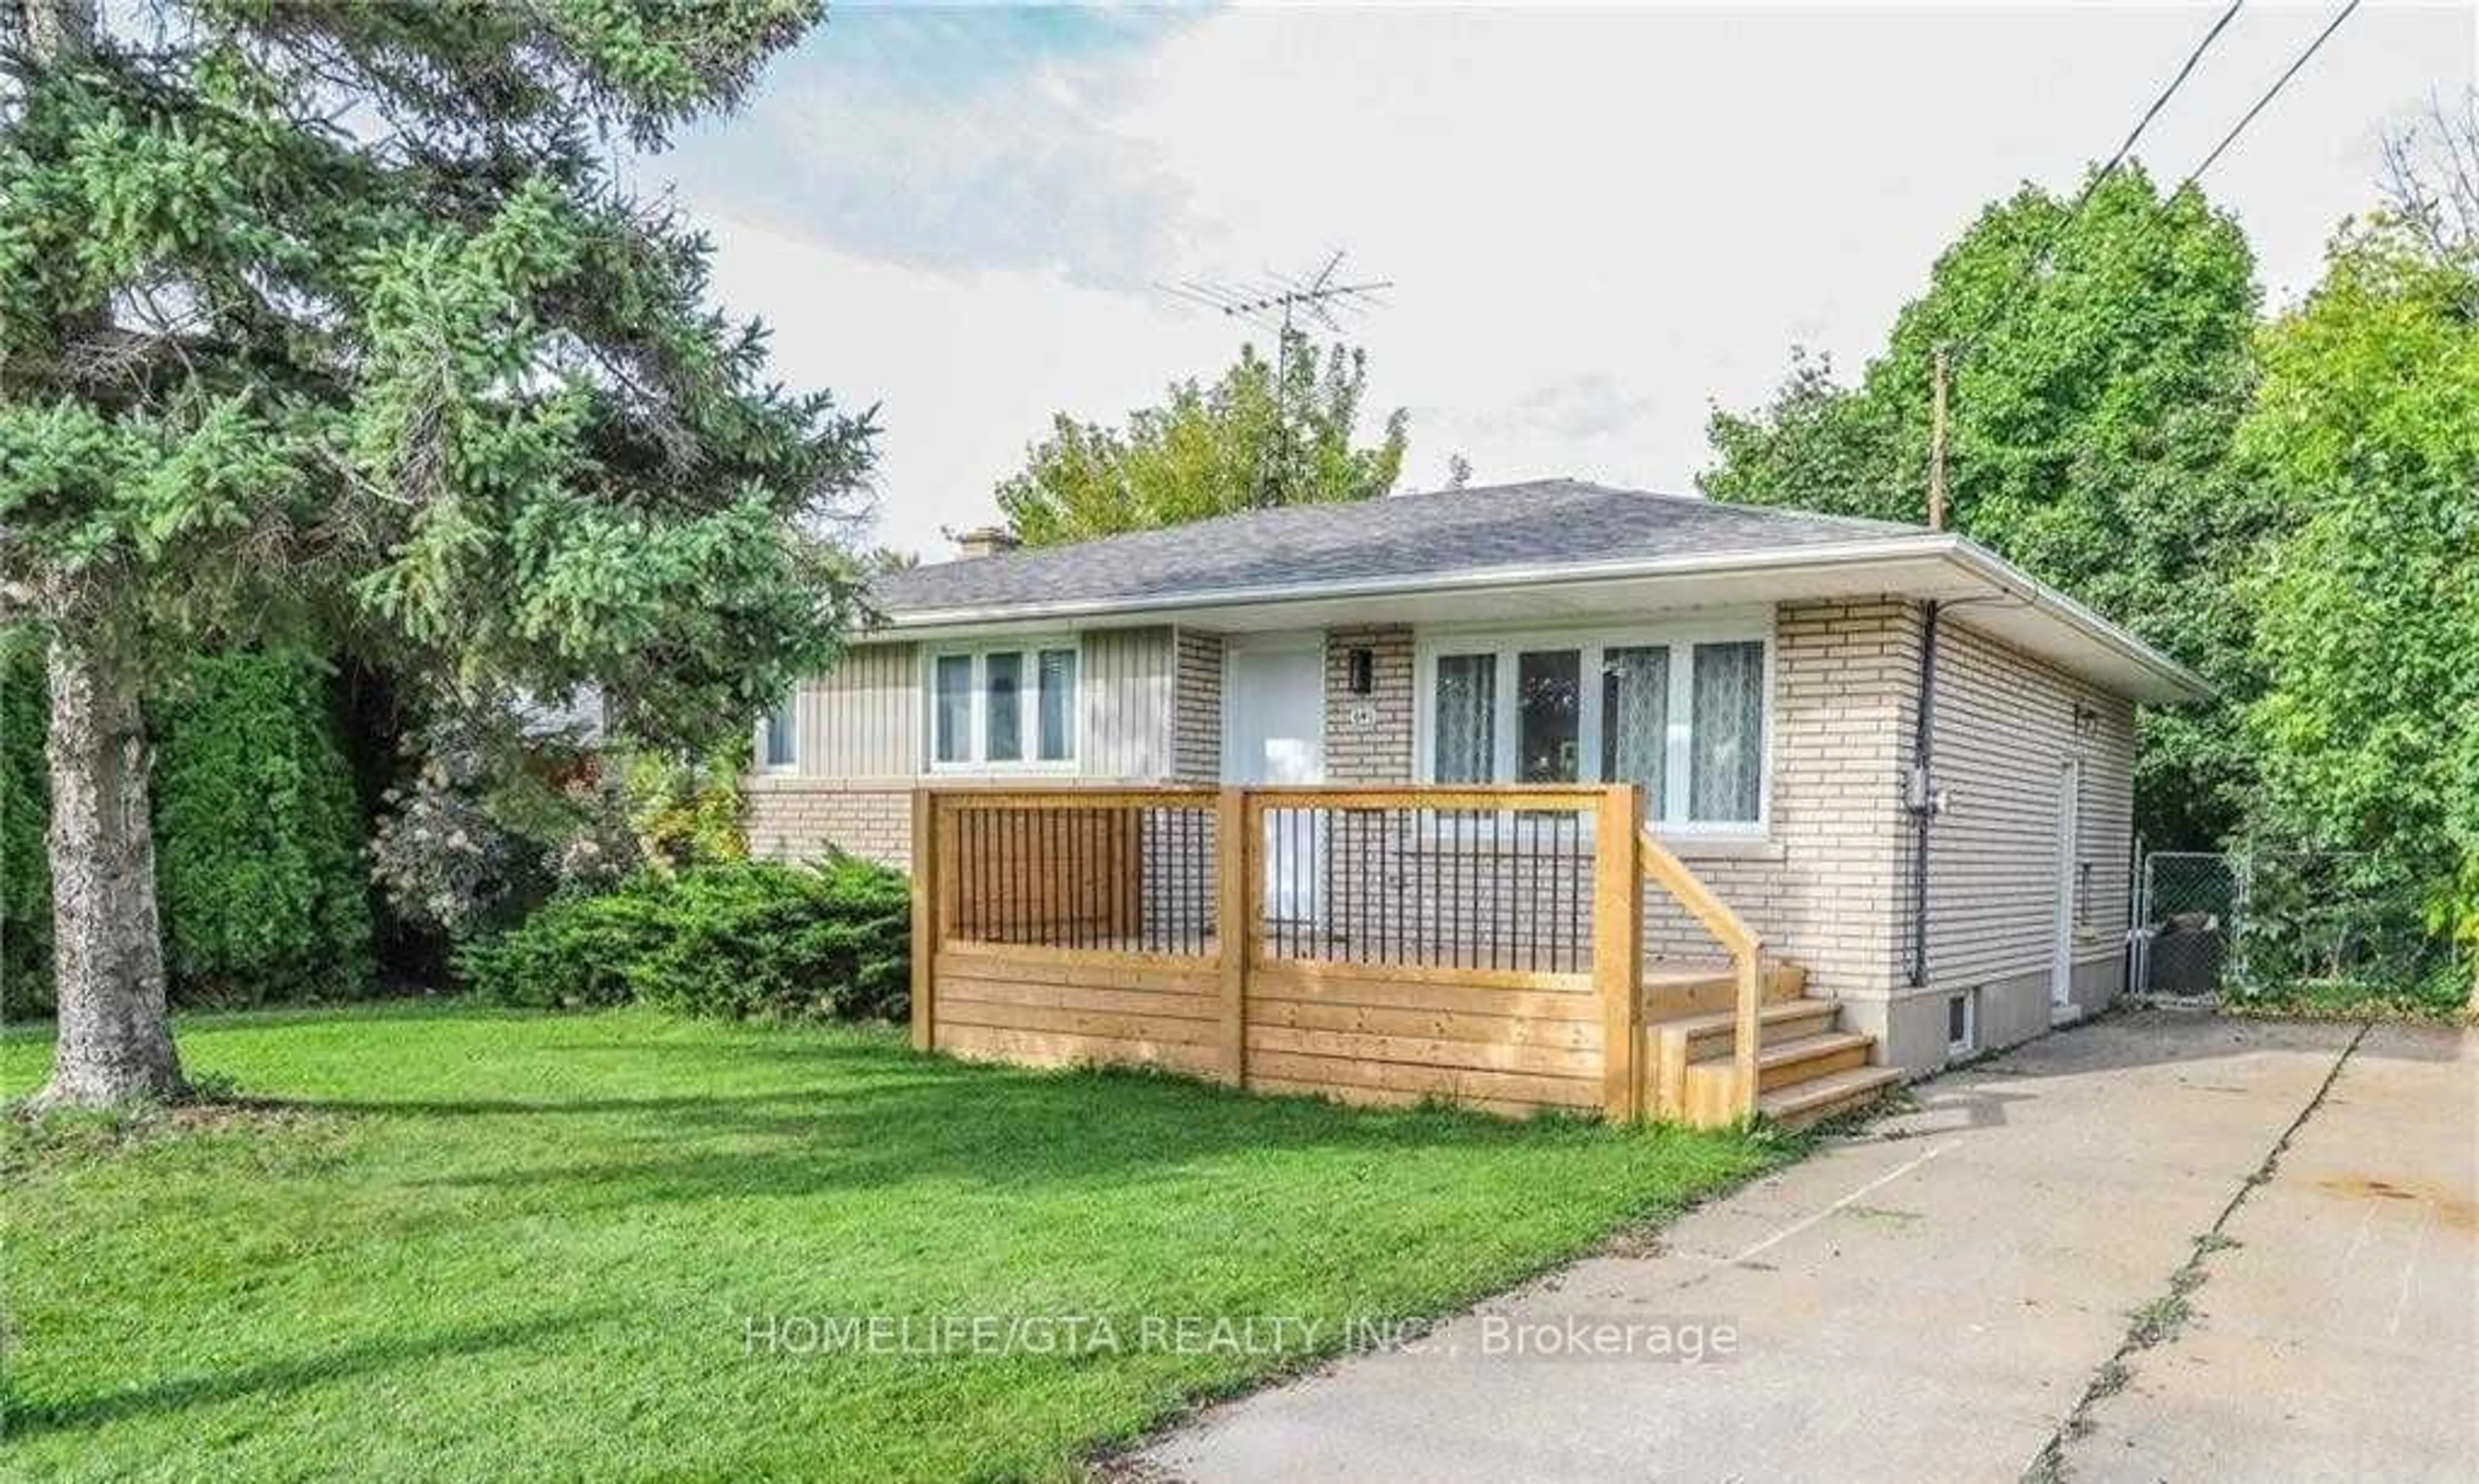 Frontside or backside of a home for 641 Niagara St, St. Catharines Ontario L2M 3P9